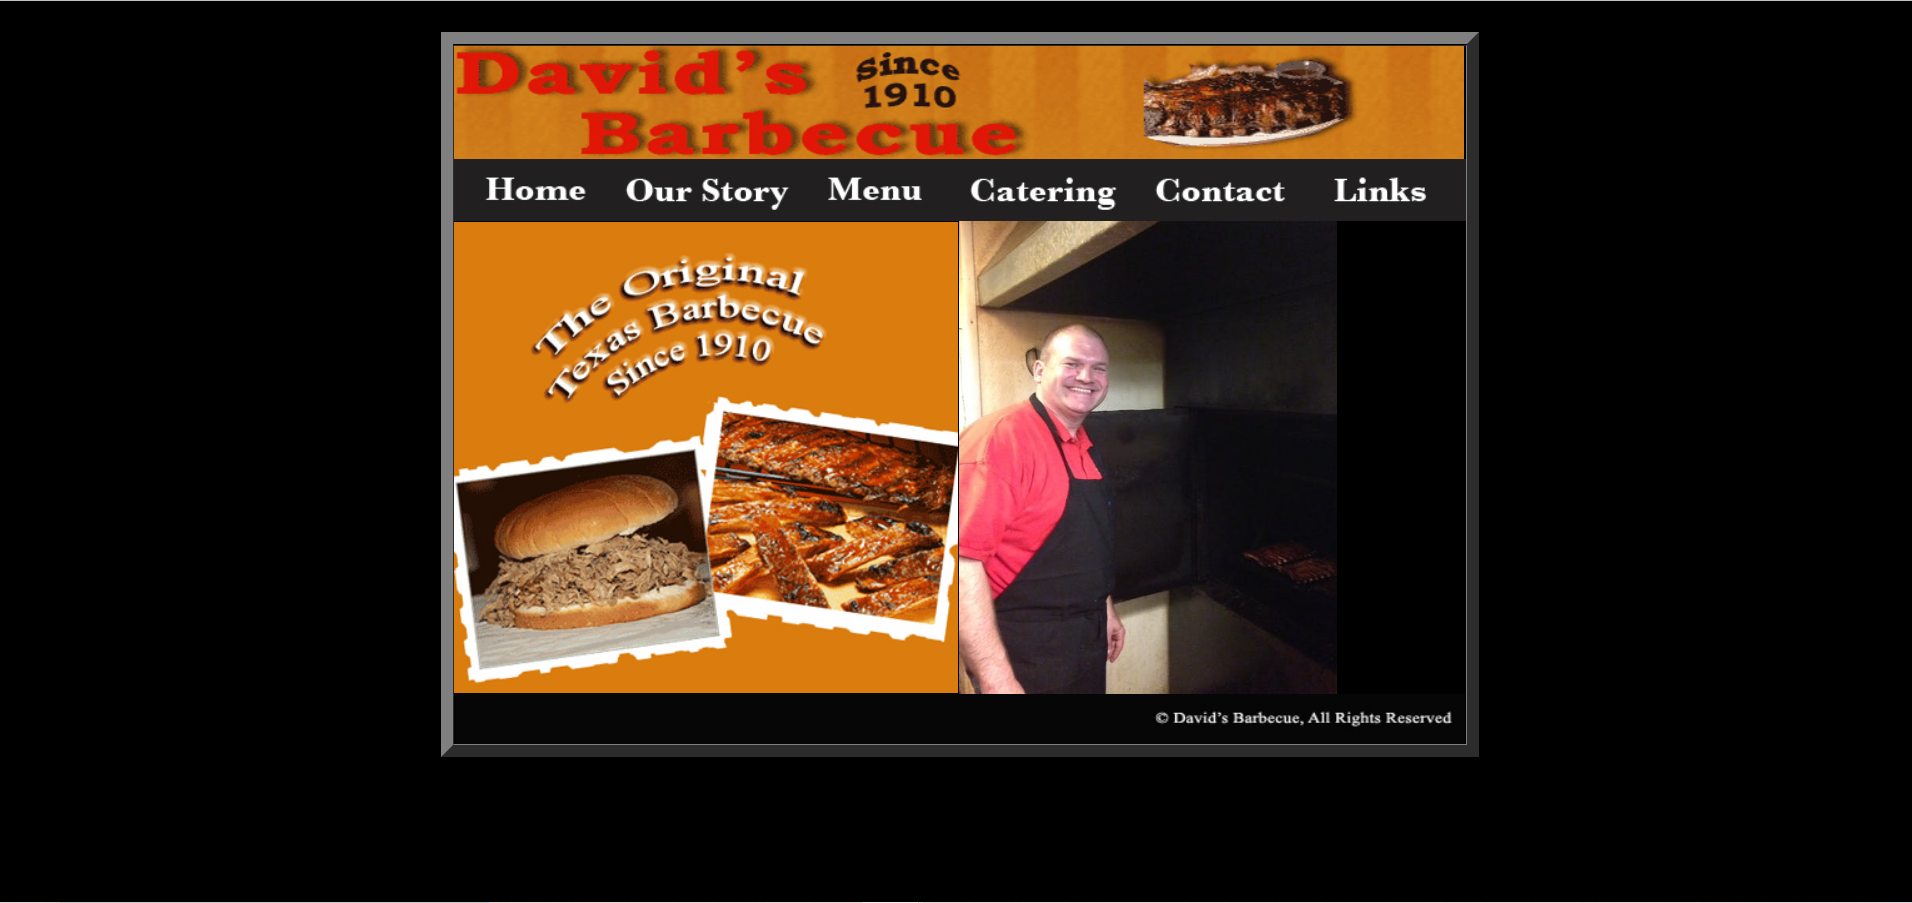 The old David's home page